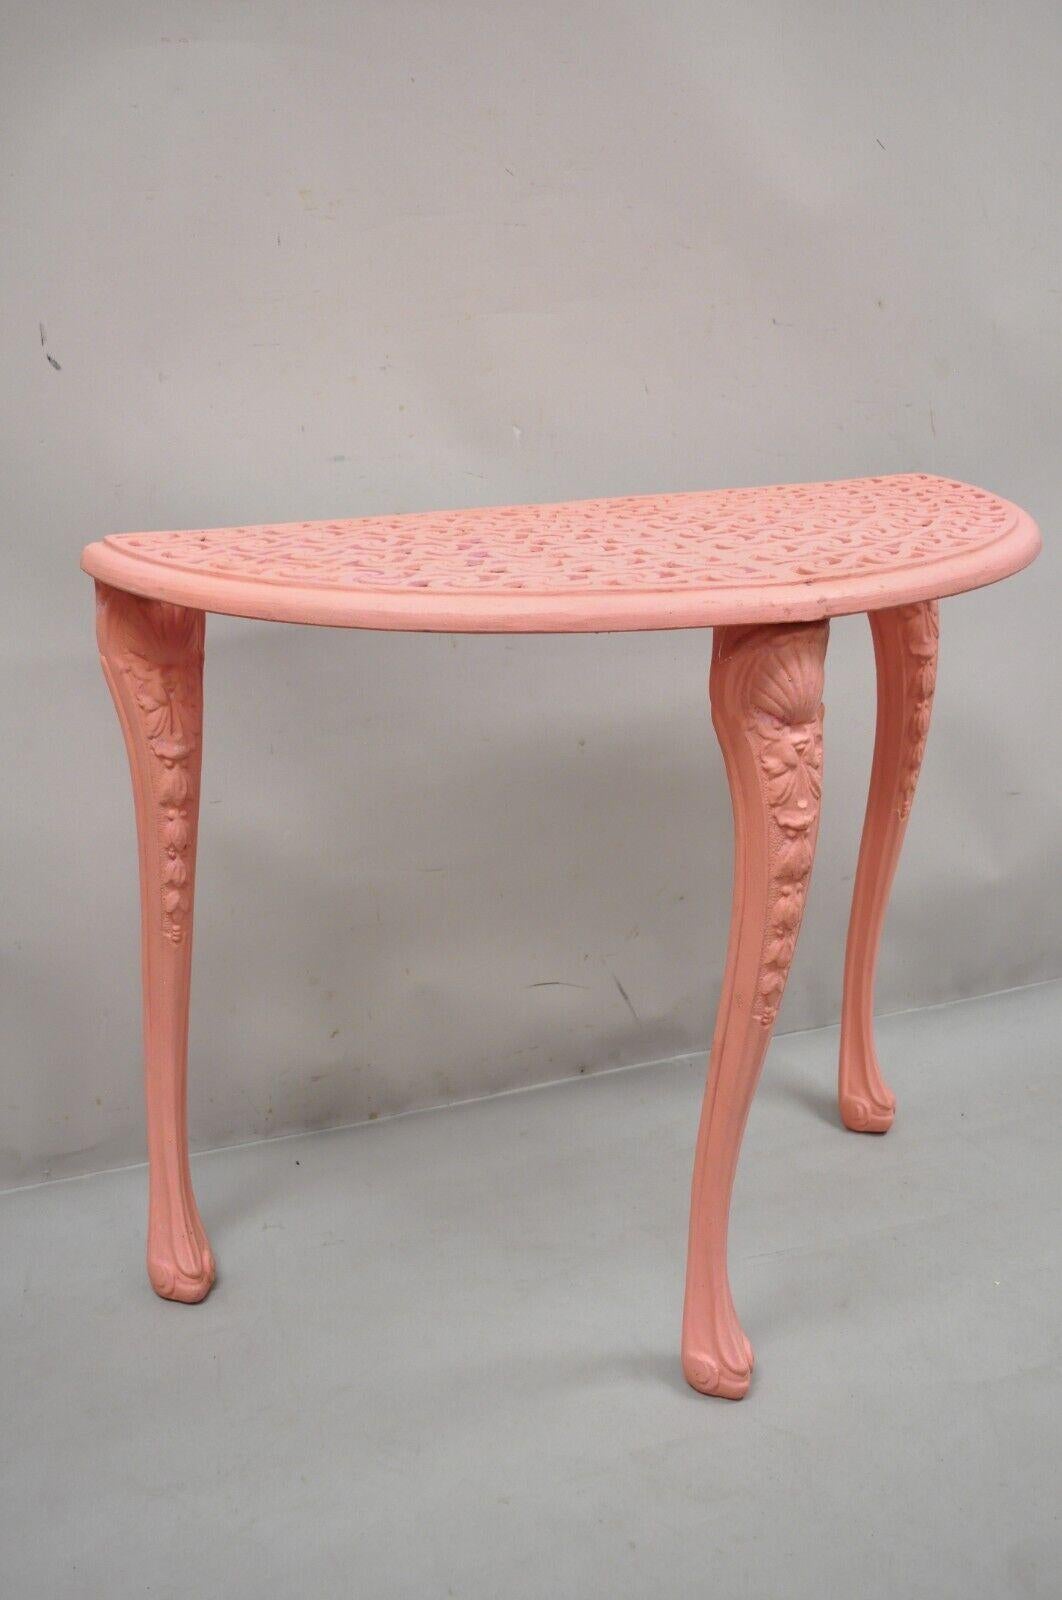 Vintage French Neoclassical Style Cast Aluminum Pink Demilune Console Table For Sale 7